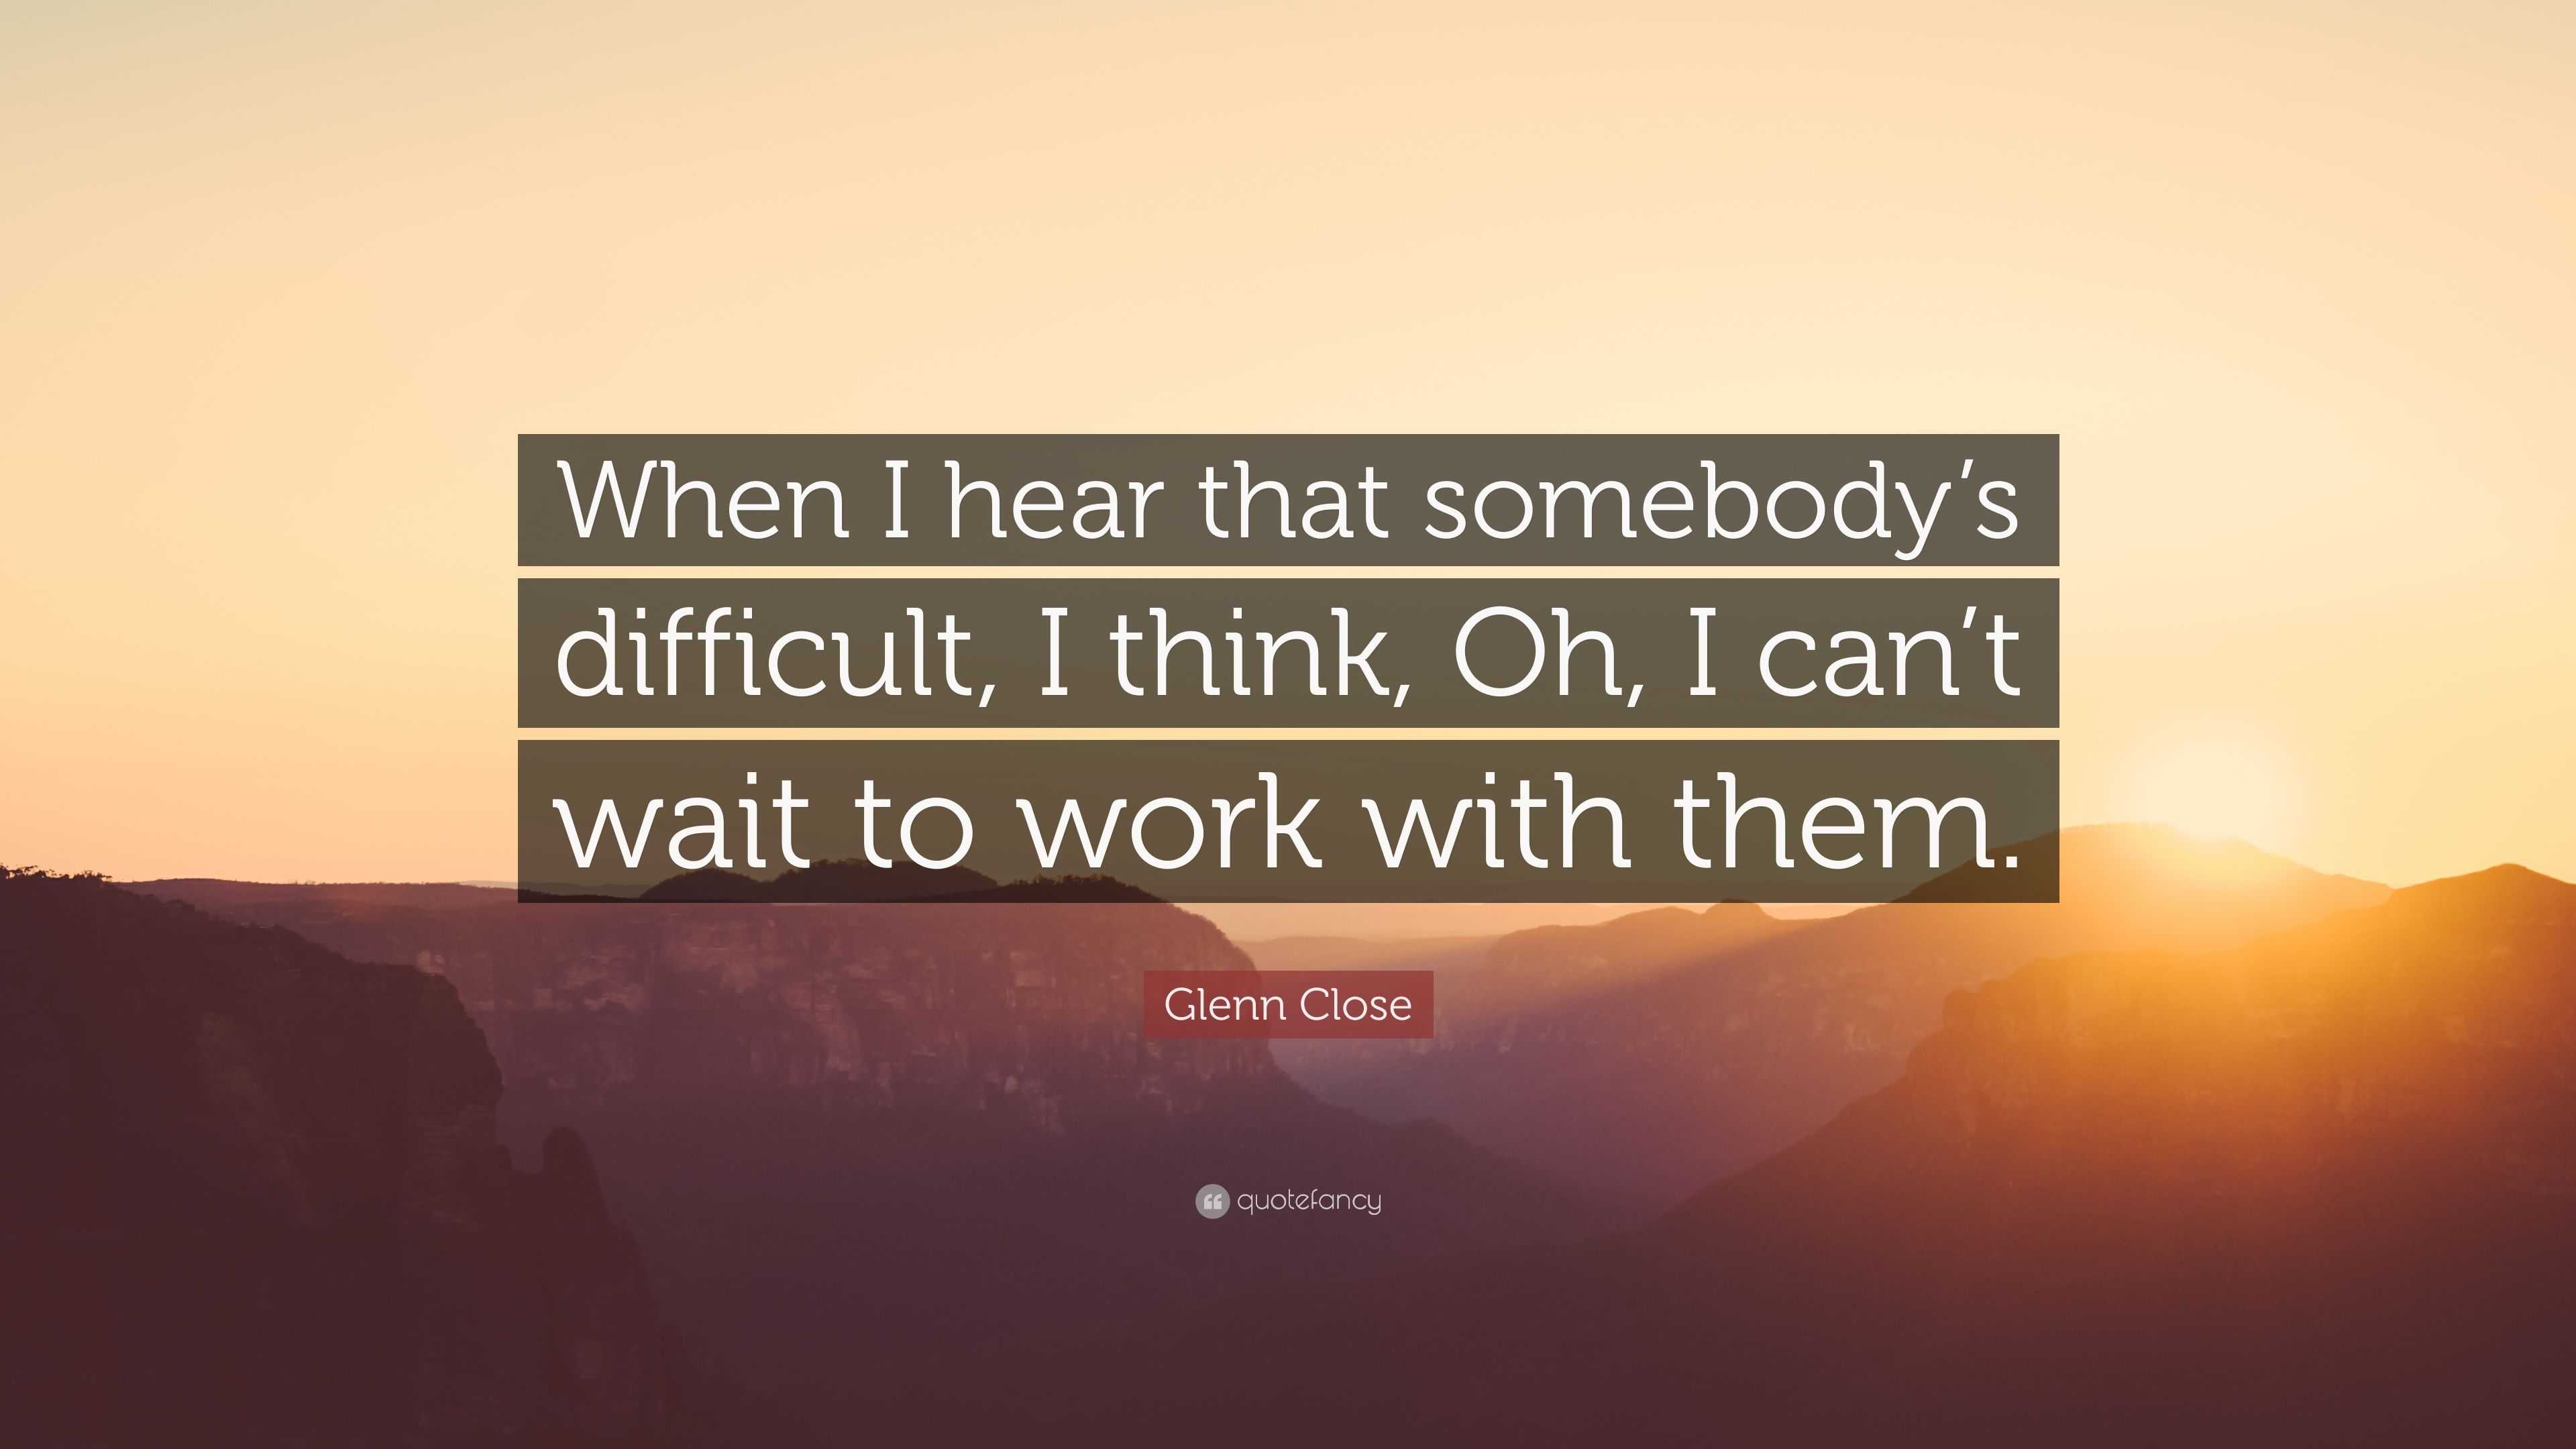 Glenn Close Quote: “When I hear that somebody’s difficult, I think, Oh ...